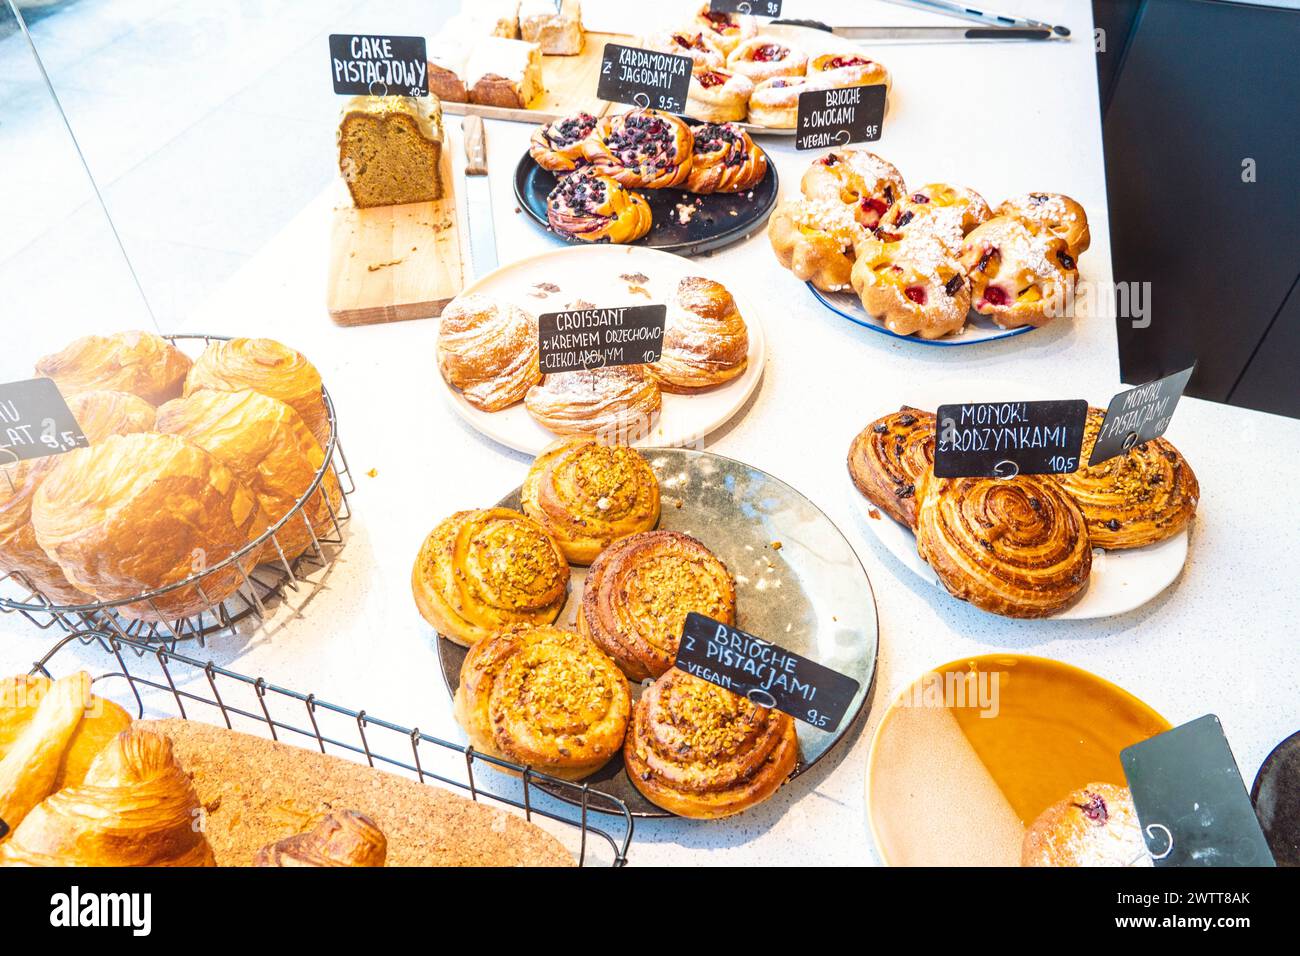 A delicious display of assorted pastries at a bakery shop. Stock Photo